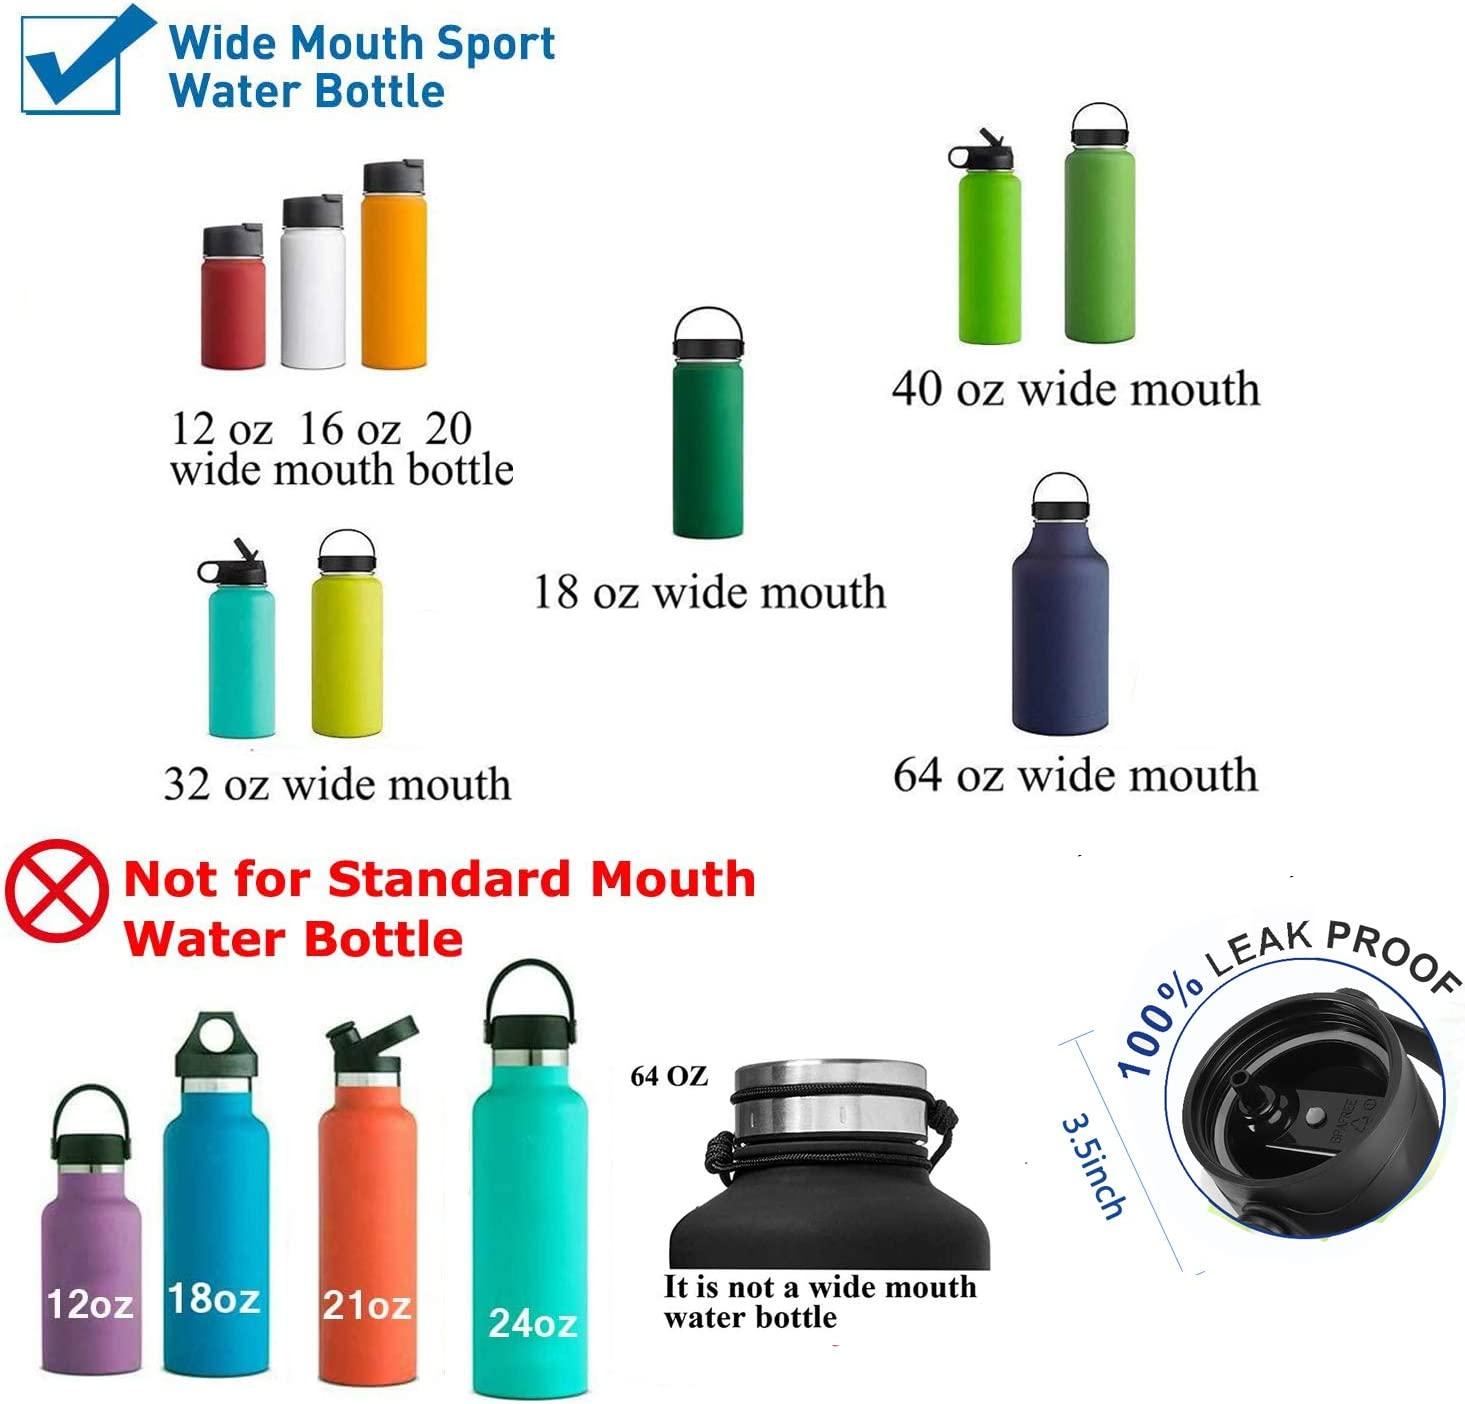 Hydro Flask 32-Ounce Wide Mouth Water Bottle with Straw Lid